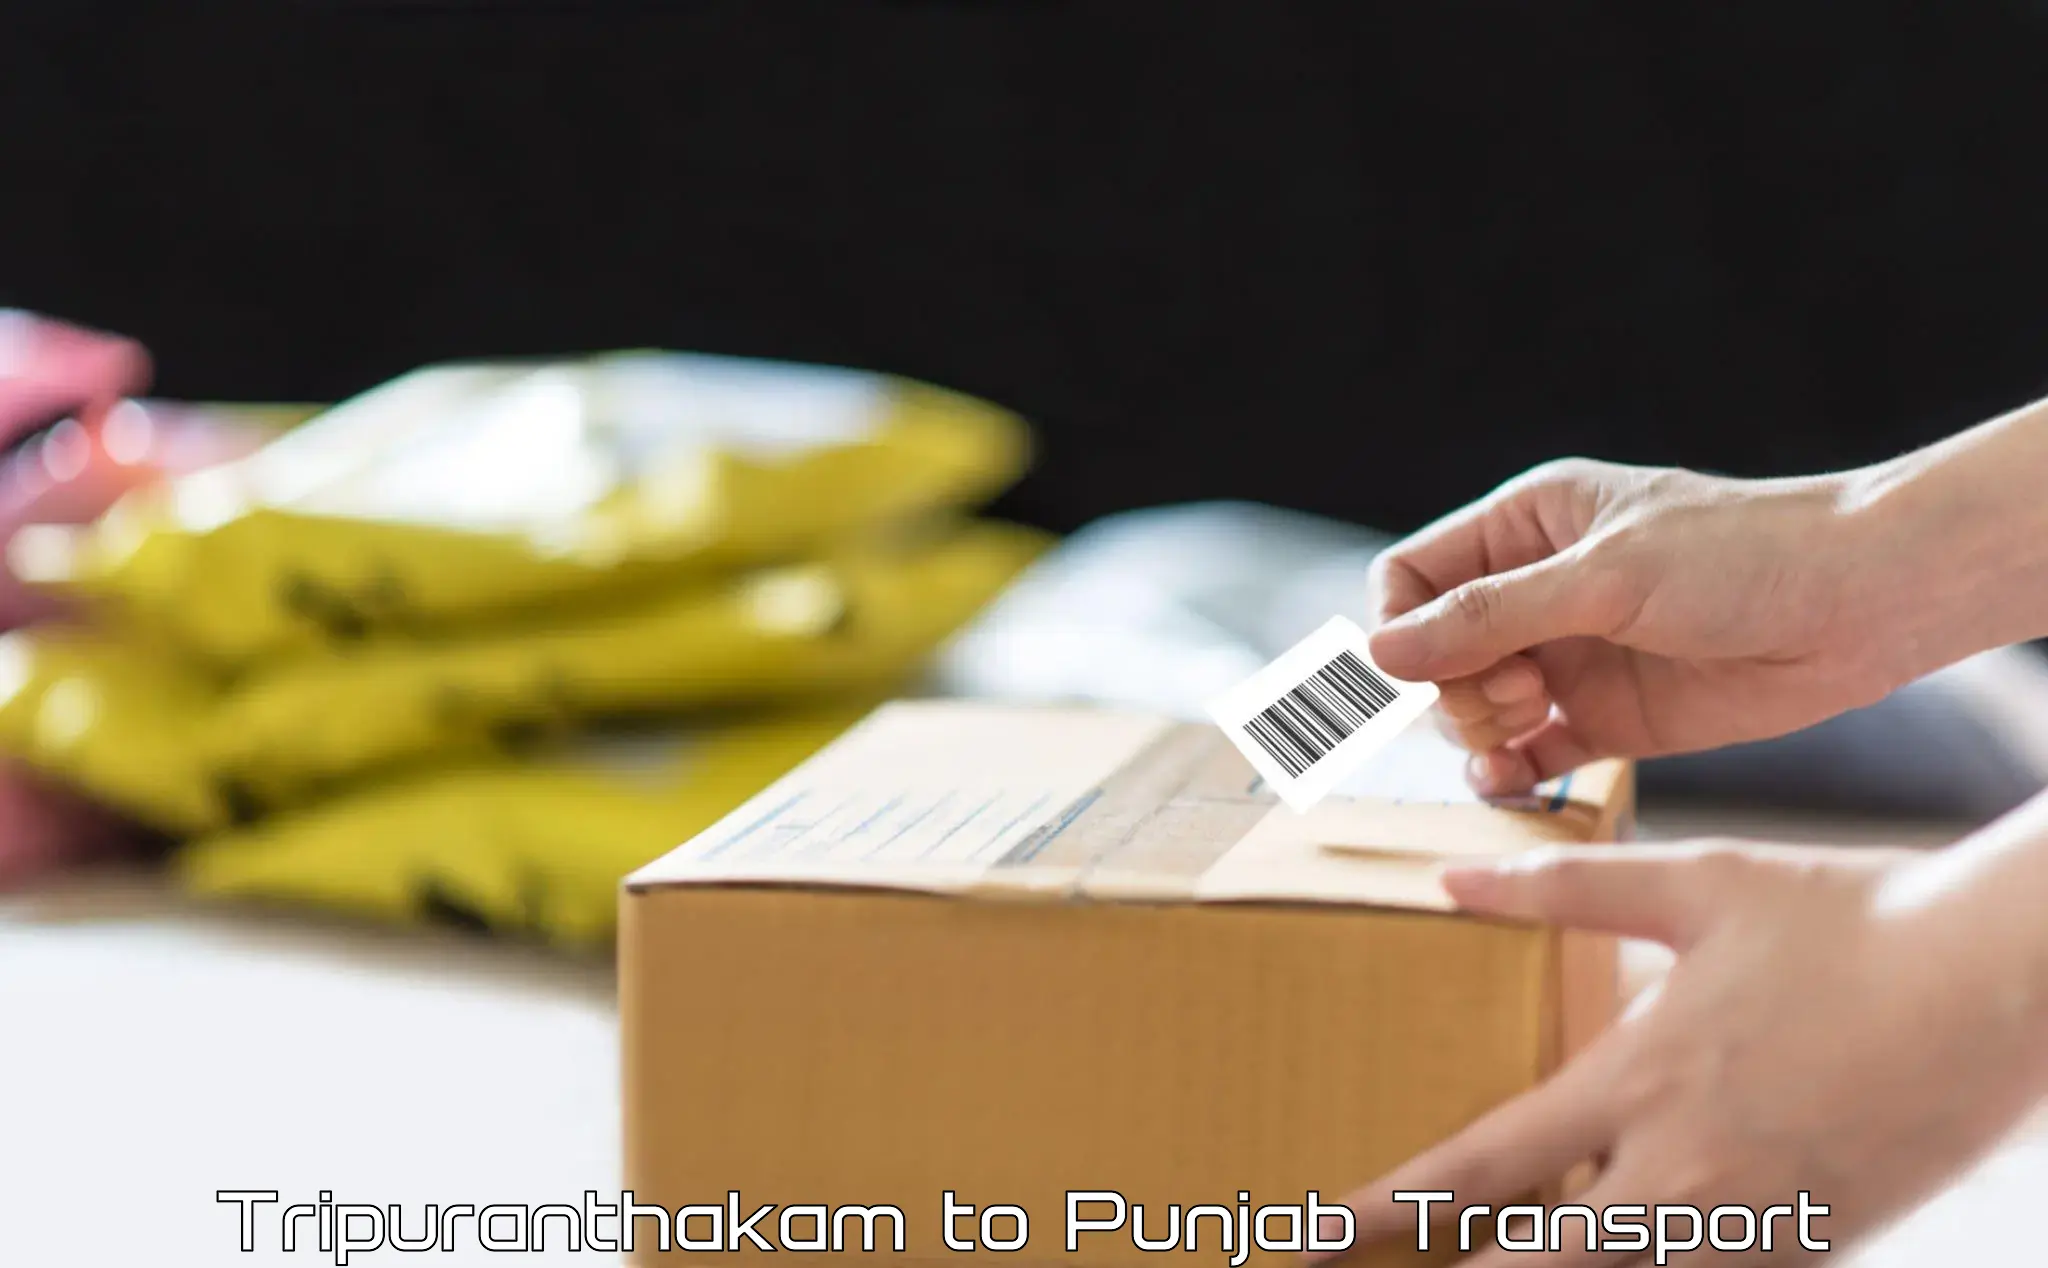 Container transport service in Tripuranthakam to Punjab